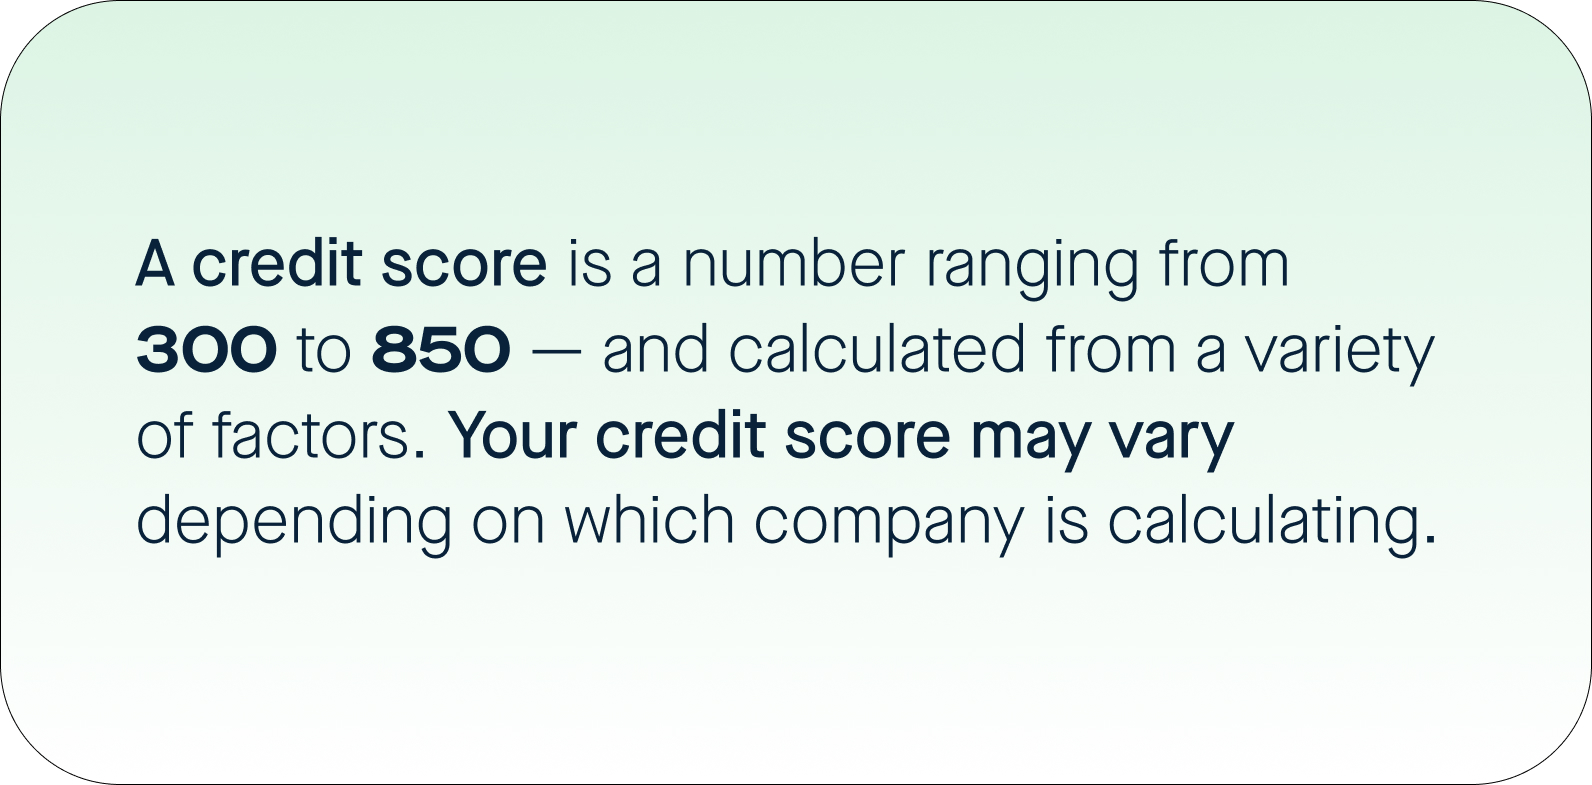 Graphic saying "A credit score is a number ranging from 300-850 - and calculated from a variety of factors. Your credit score may vary depending on which company is calculating."